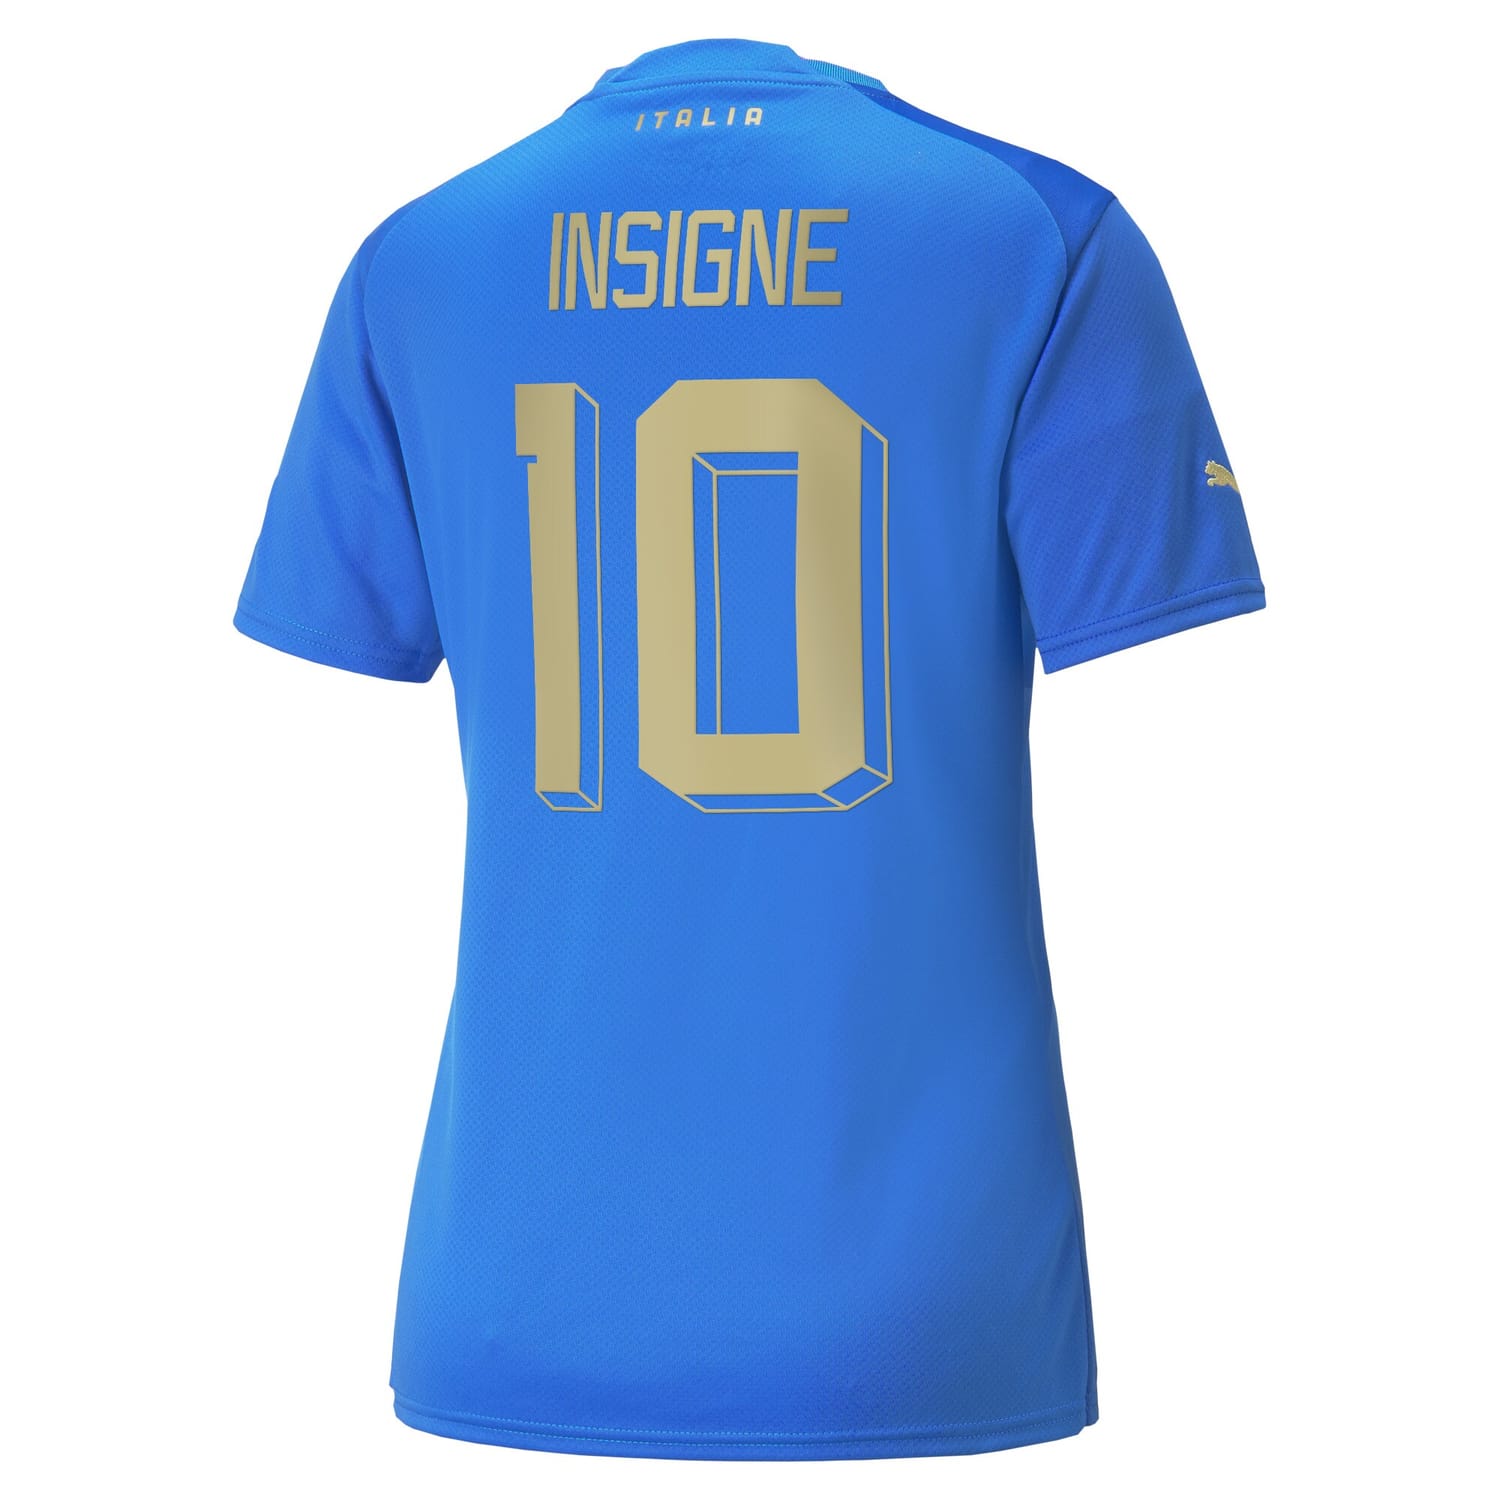 Italy National Team Home Jersey Shirt Blue 2022-23 player Lorenzo Insigne printing for Women